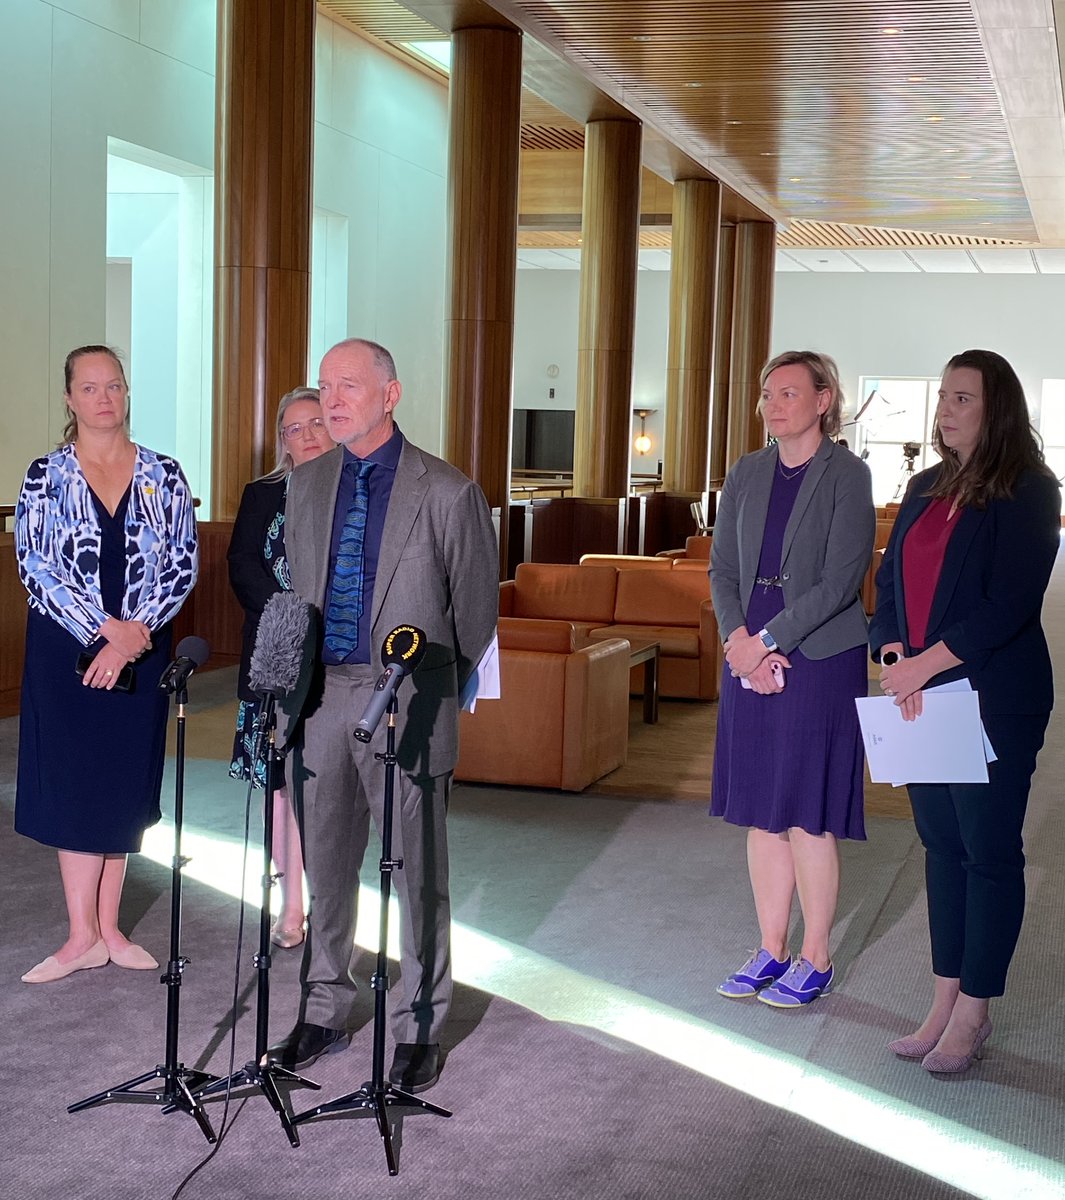 Australia’s leading health orgs welcomed vital new vaping legislation introduced to Parliament today. PHAA CEO, Adj Prof @terryslevin urges all Members of Parliament to ignore “deliberate confusion” about vaping reforms generated by nicotine- and tobacco industry-funded groups.